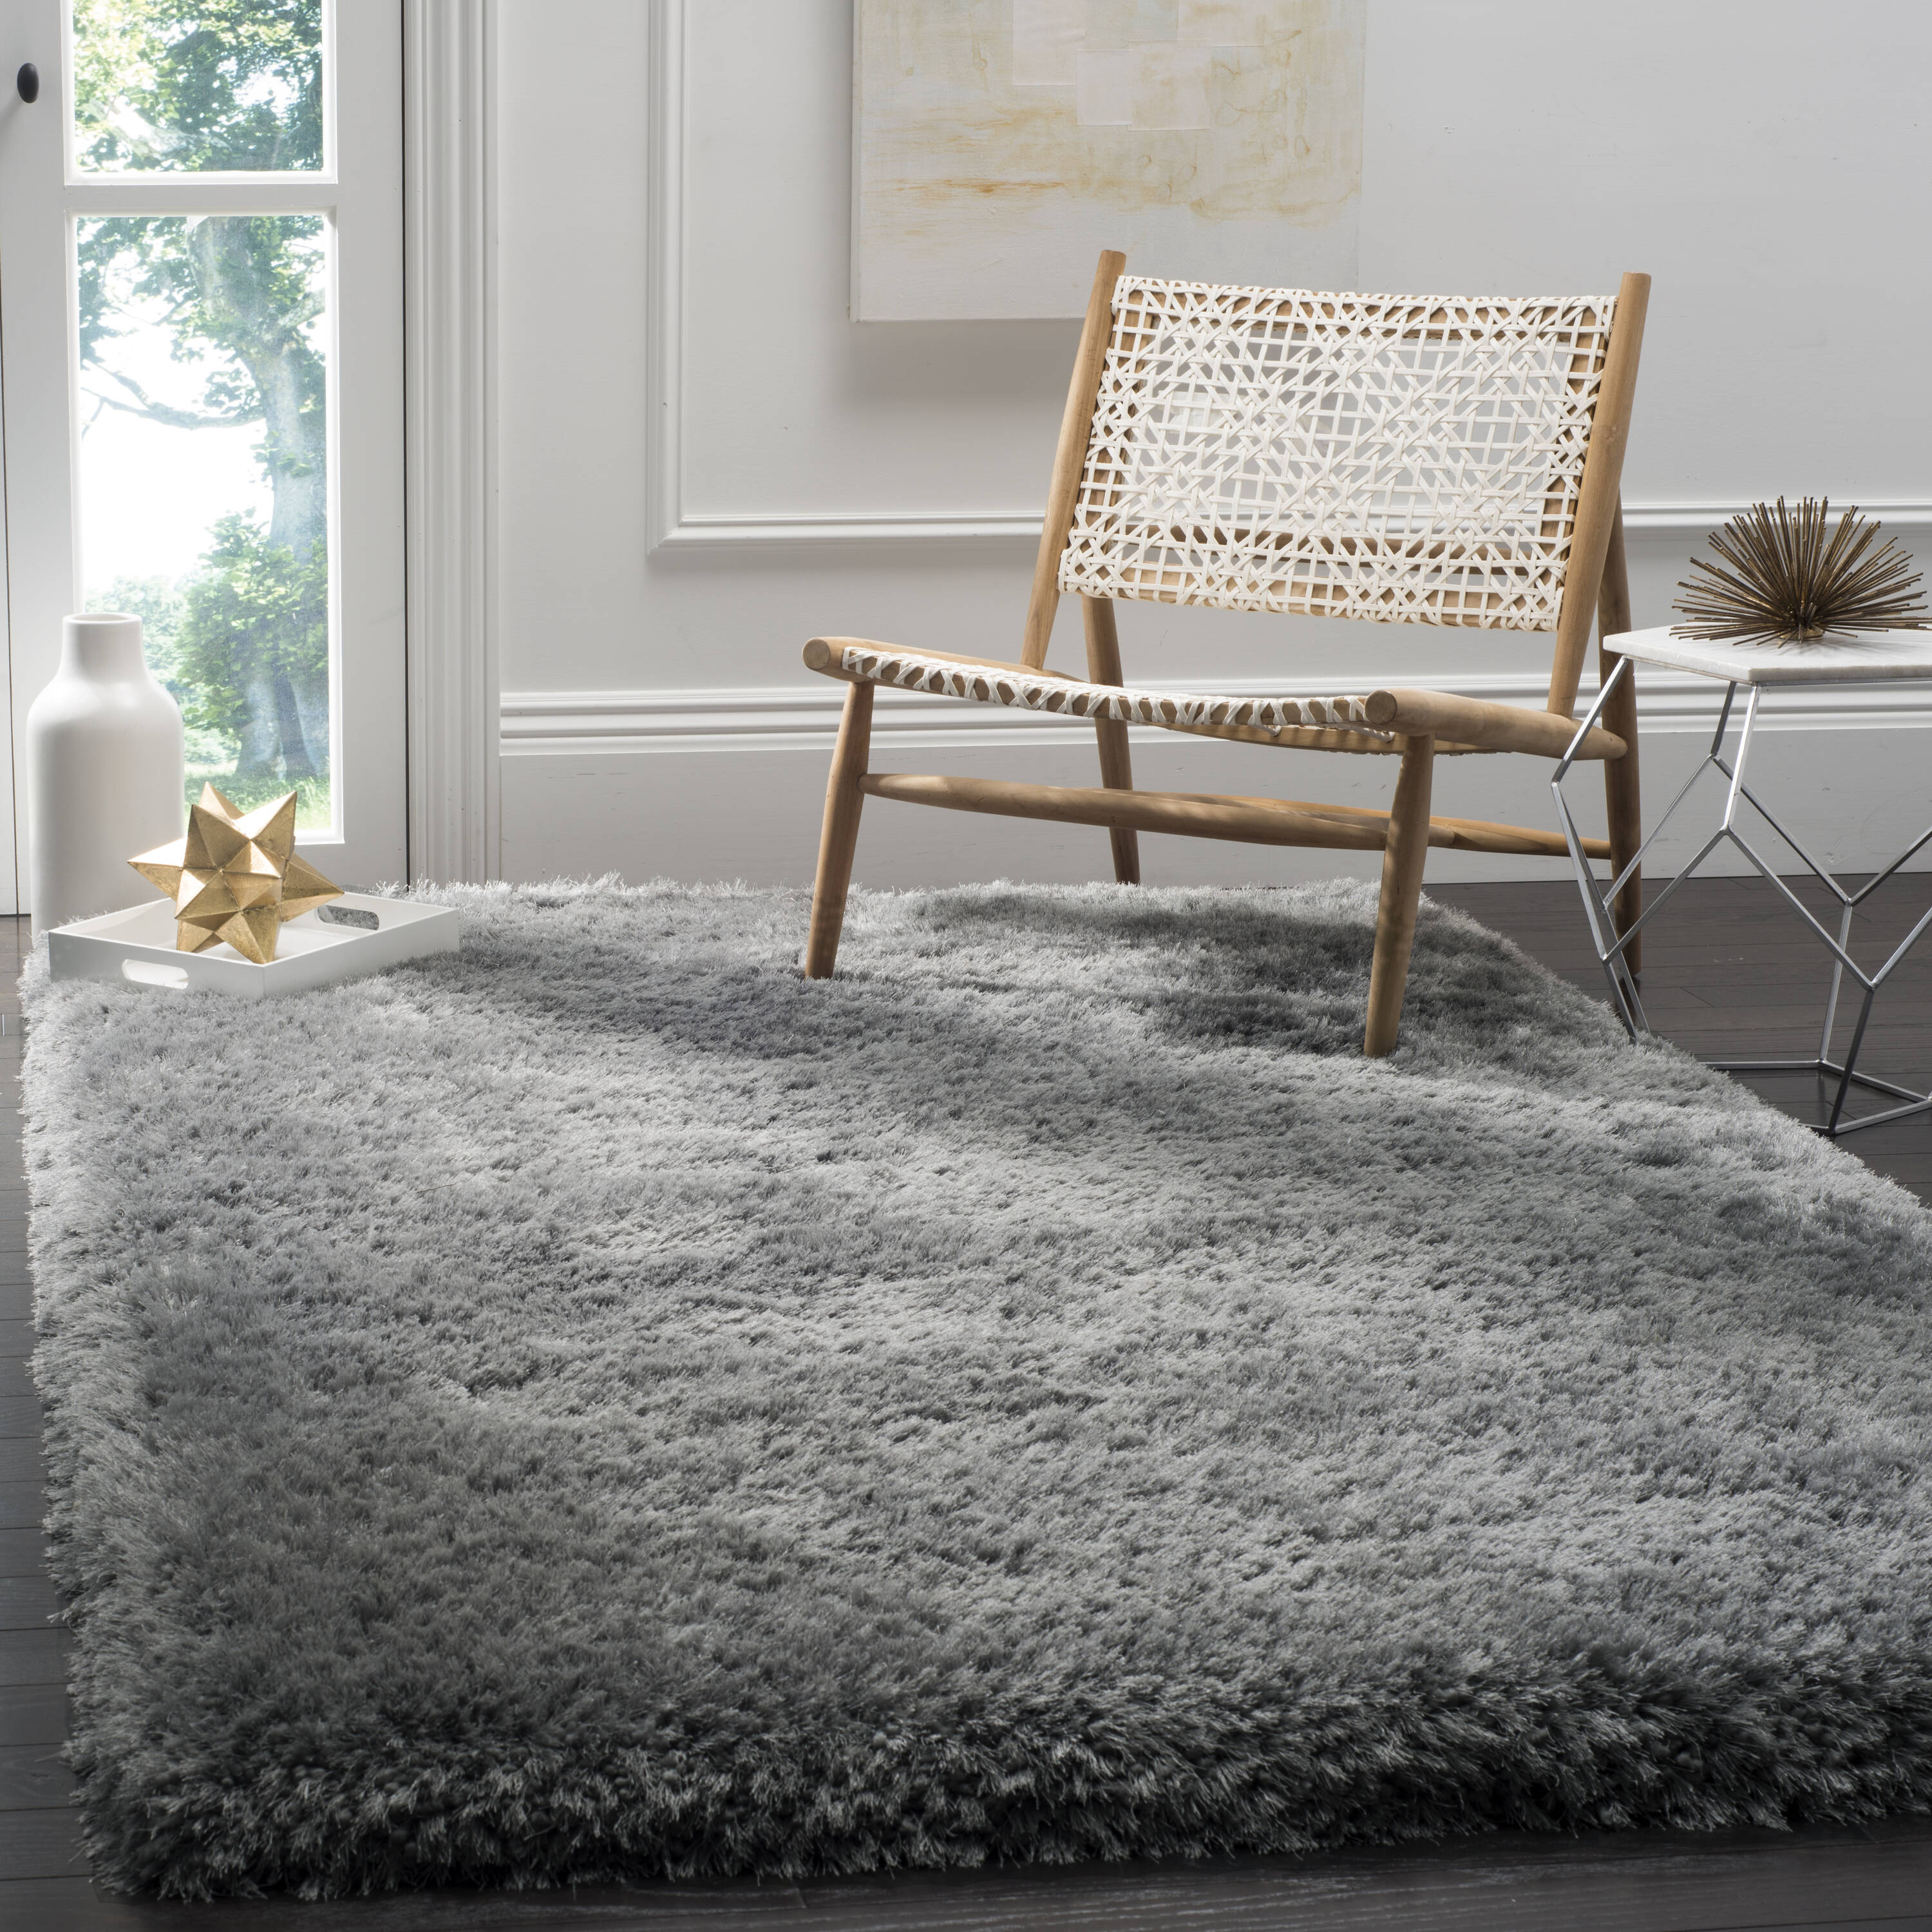 SAFAVIEH Braided Collection Area Rug - 9' x 12' Oval, Multi, Handmade  Country Cottage Reversible Cotton, Ideal for High Traffic Areas in Living  Room